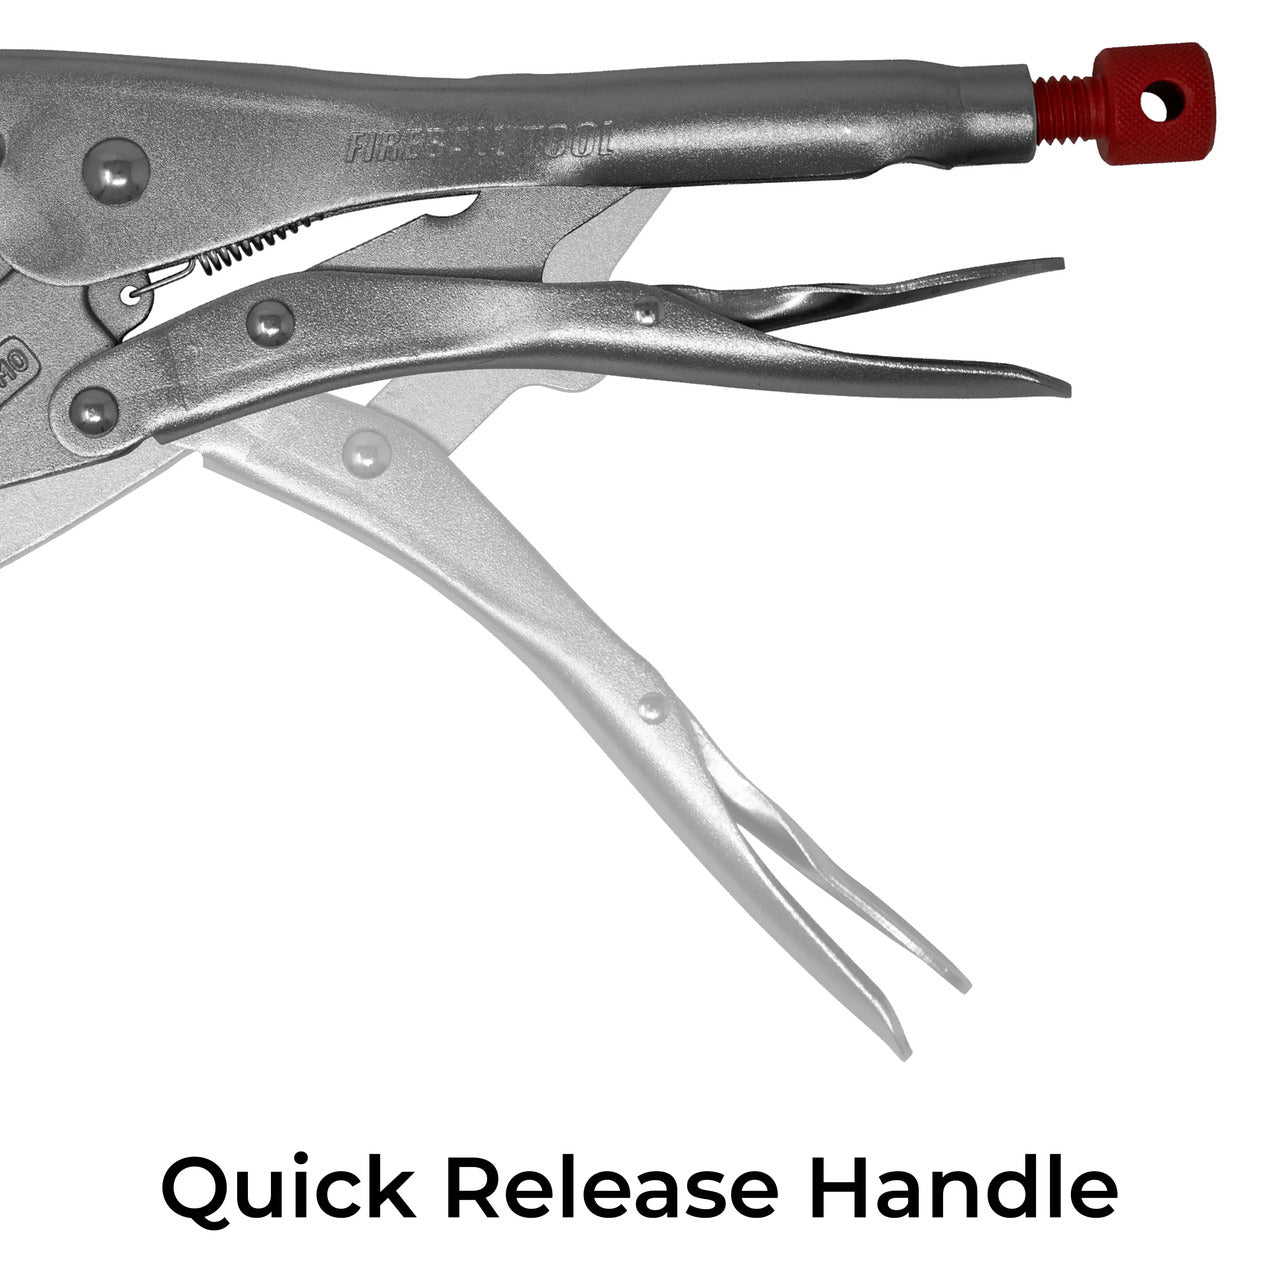 Curved Jaw Locking Pliers (2-Pack)